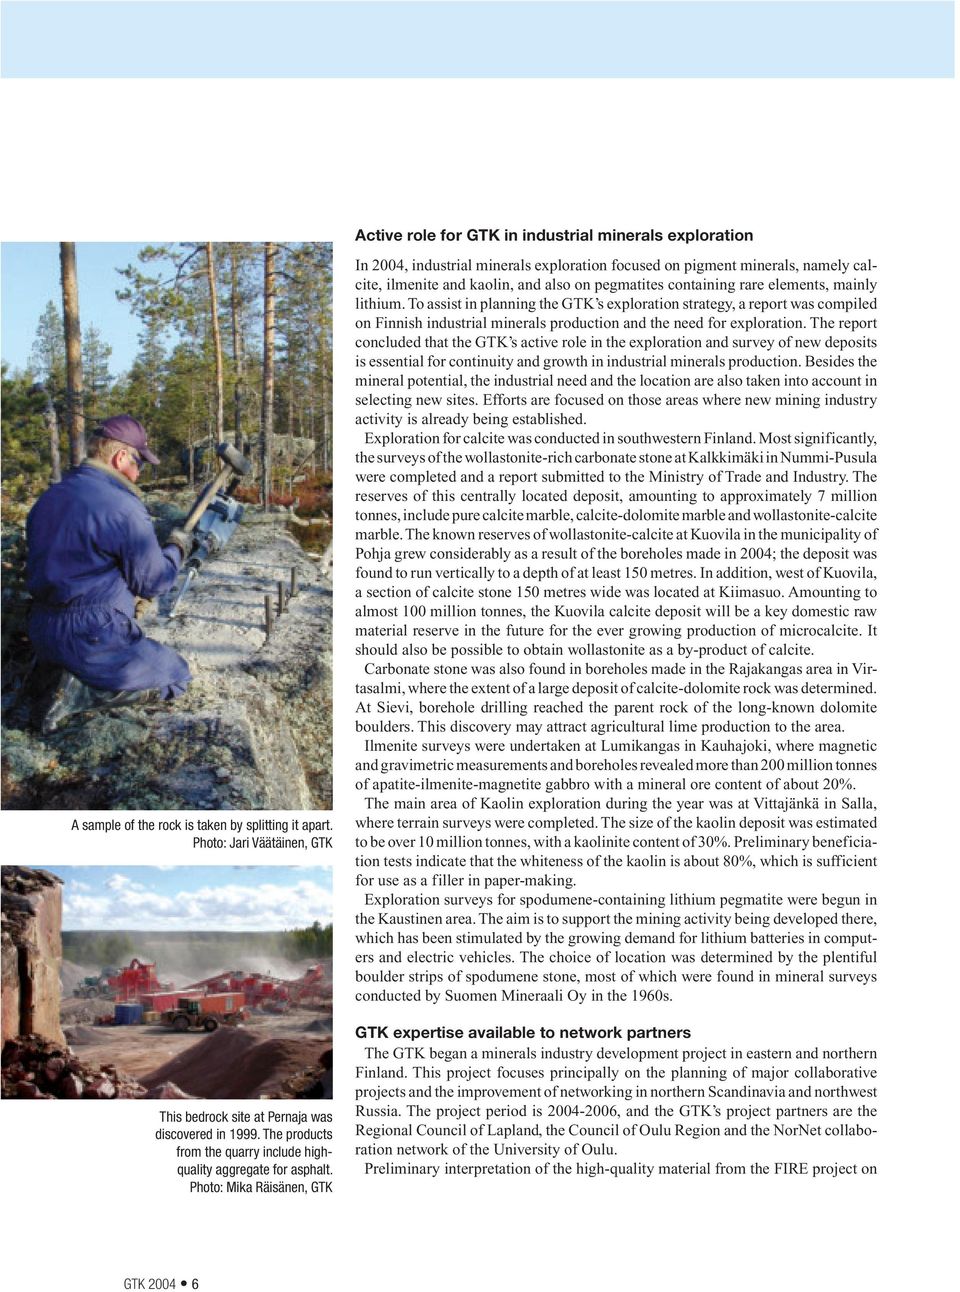 Photo: Mika Räisänen, GTK In 2004, industrial minerals exploration focused on pigment minerals, namely calcite, ilmenite and kaolin, and also on pegmatites containing rare elements, mainly lithium.